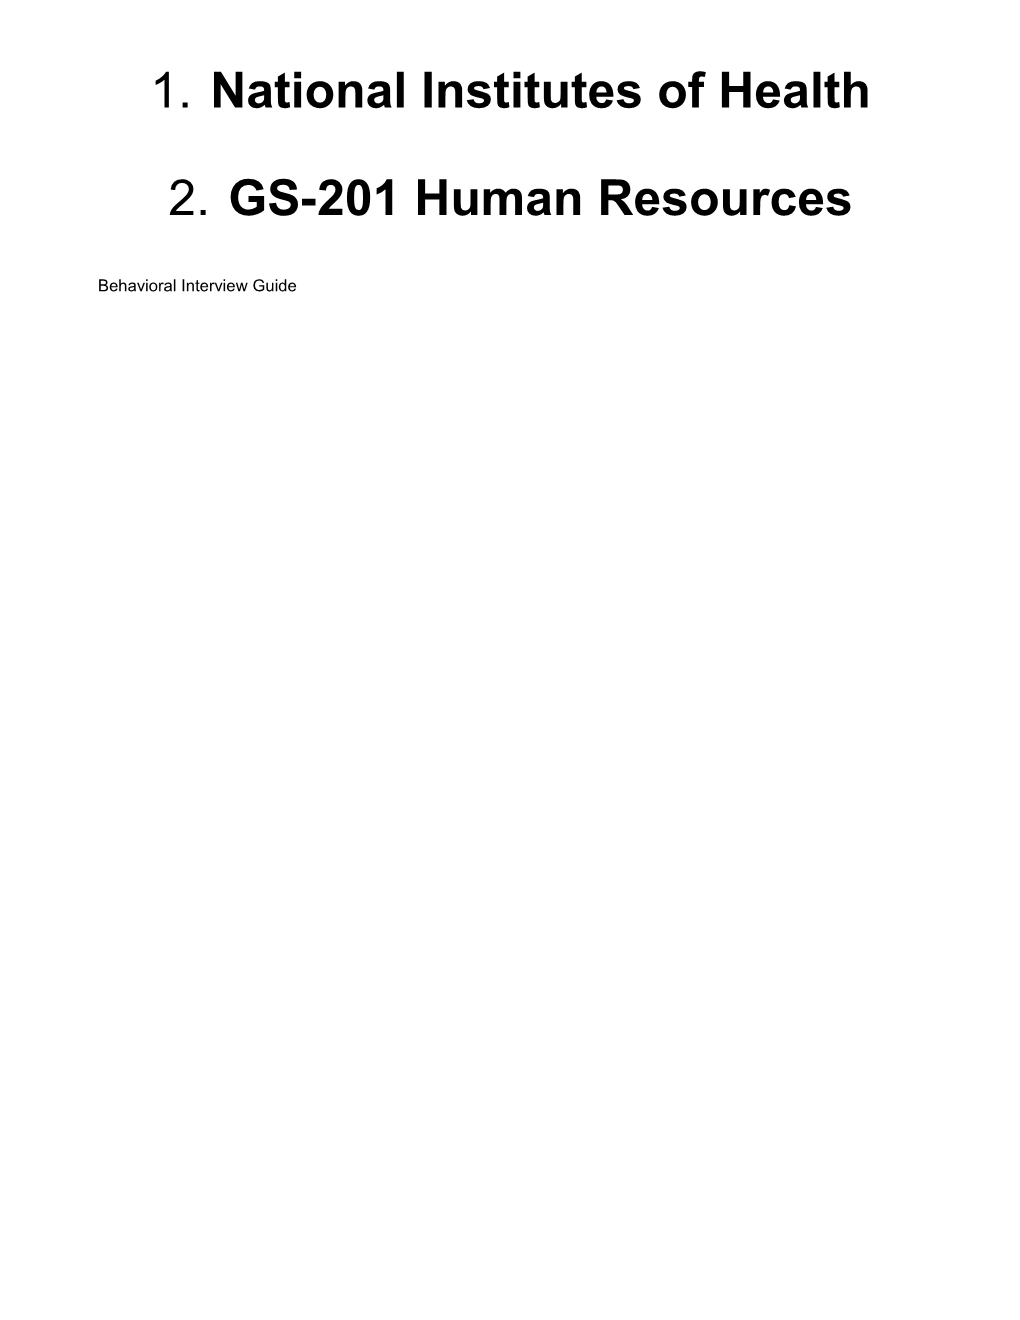 NIH Behavioral Interview Guide GS-201 Human Resources